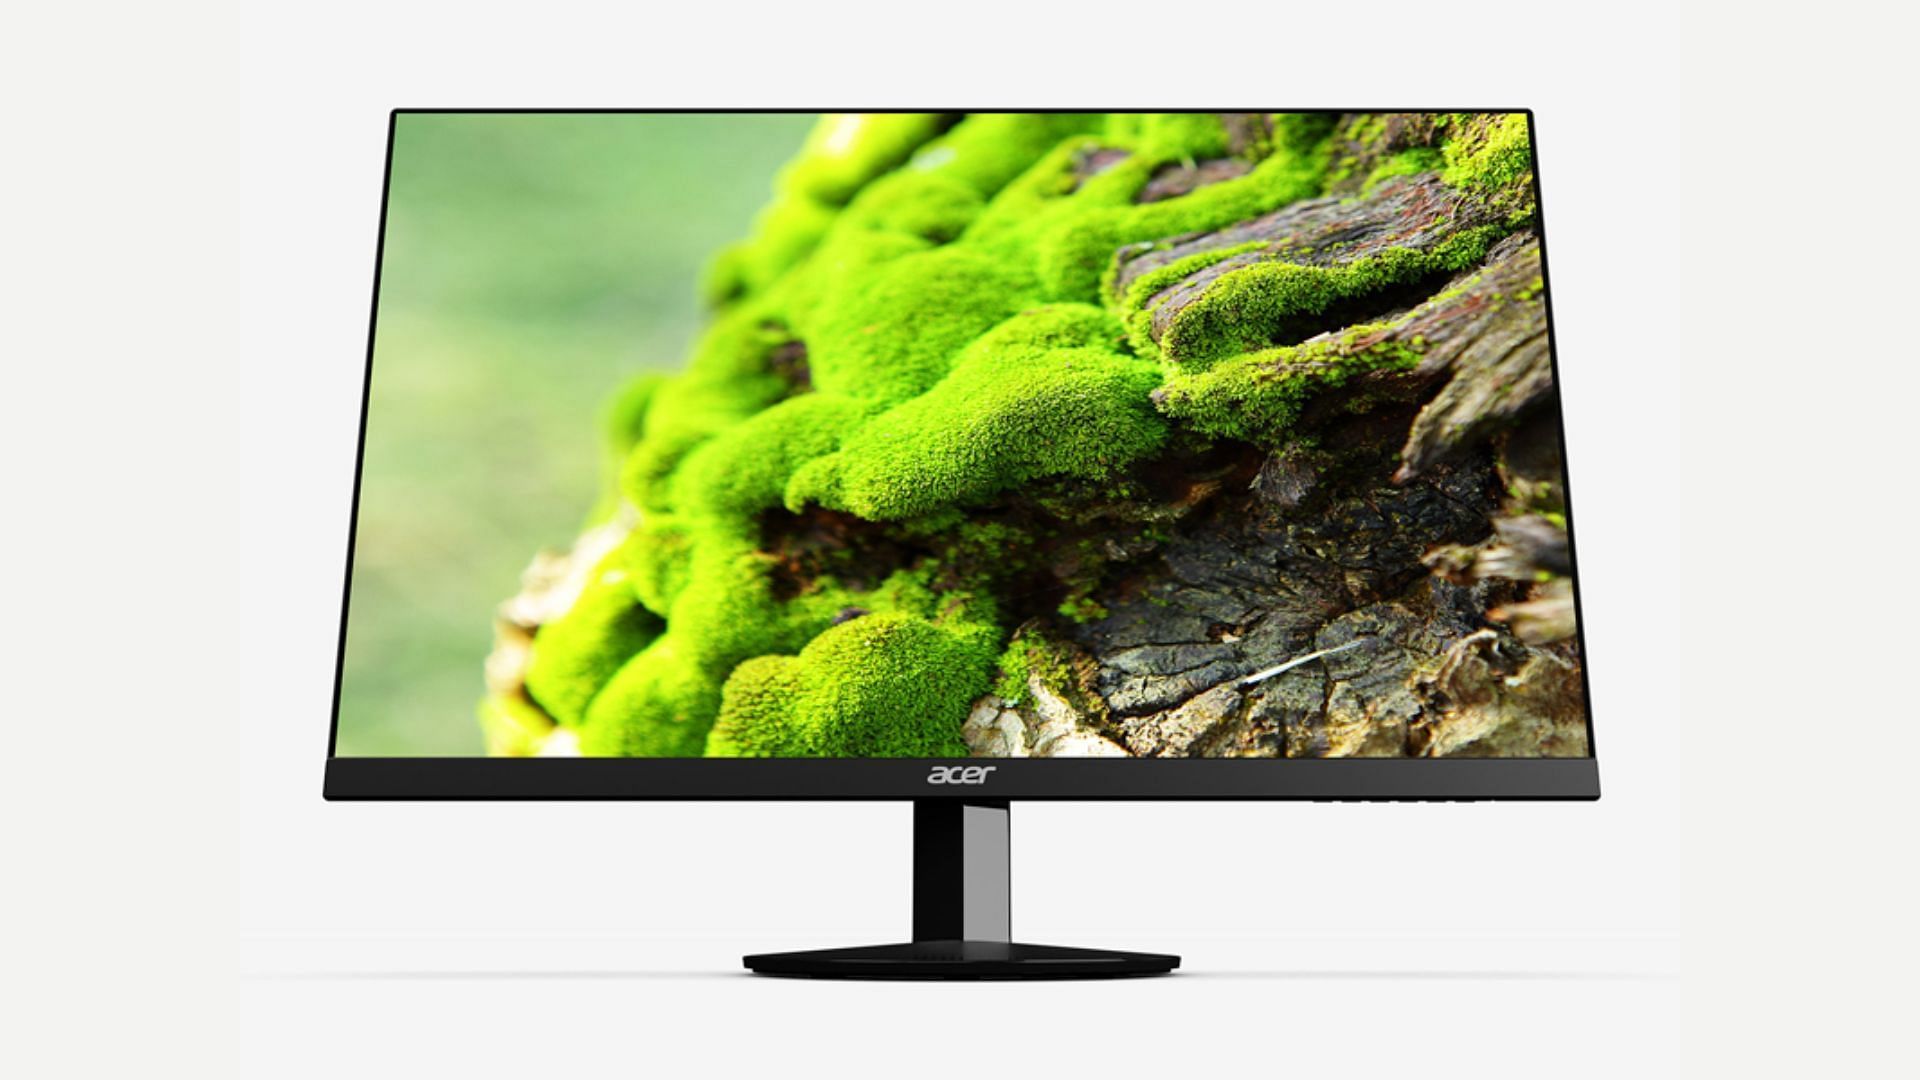 Lightweight and compact monitor (Image via Acer/Amazon)